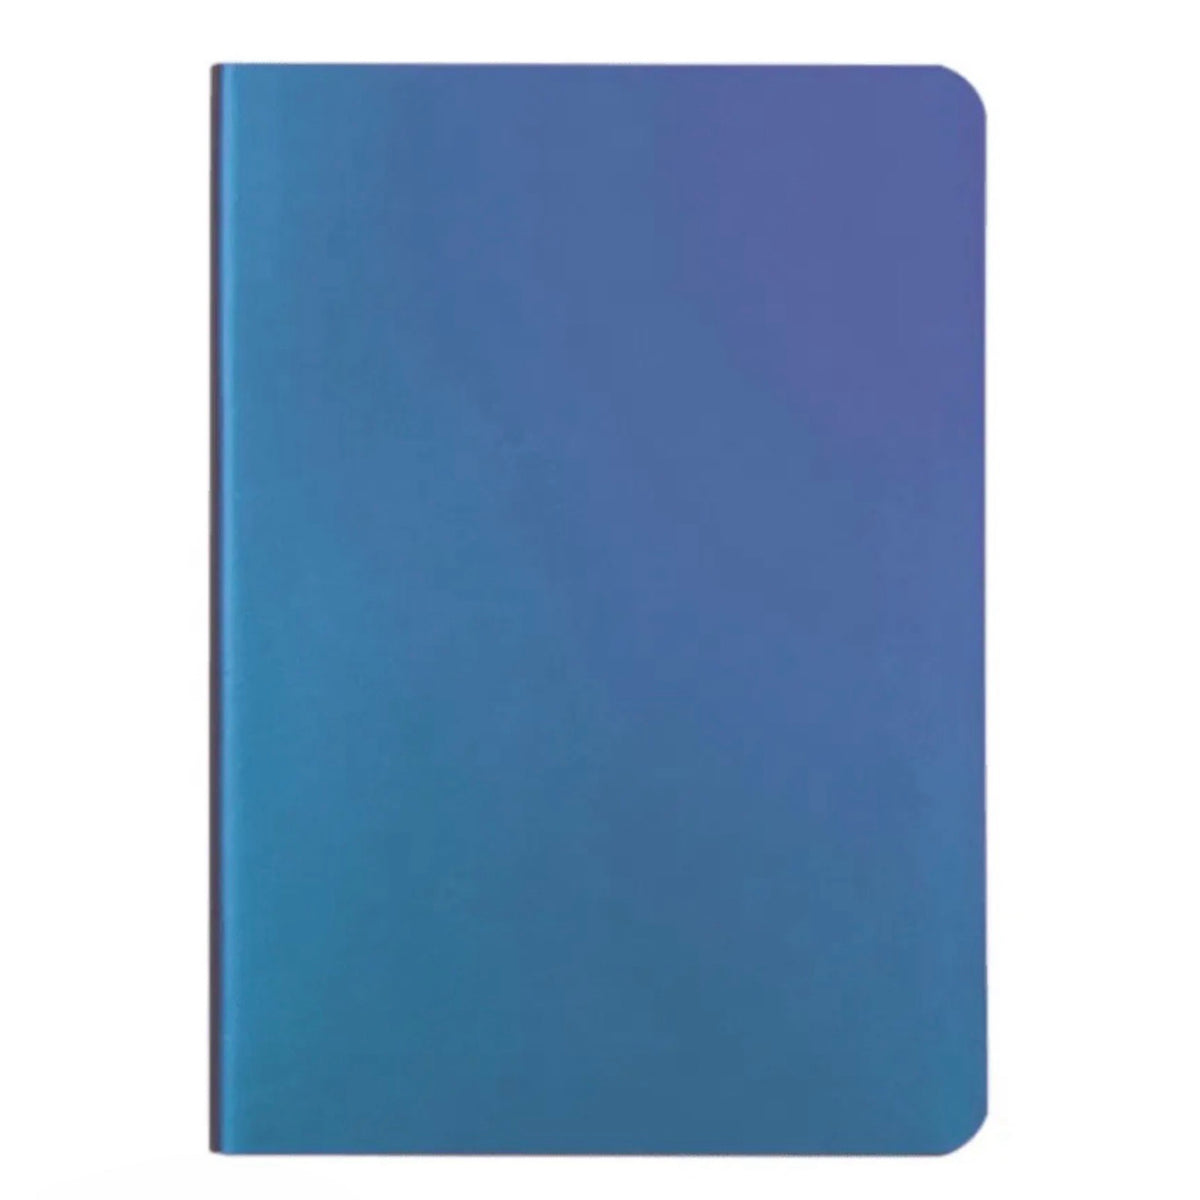 Iridescent 5 x 7 Lined Soft Covered 80pg Notebook  - For Journal Writing & Notes